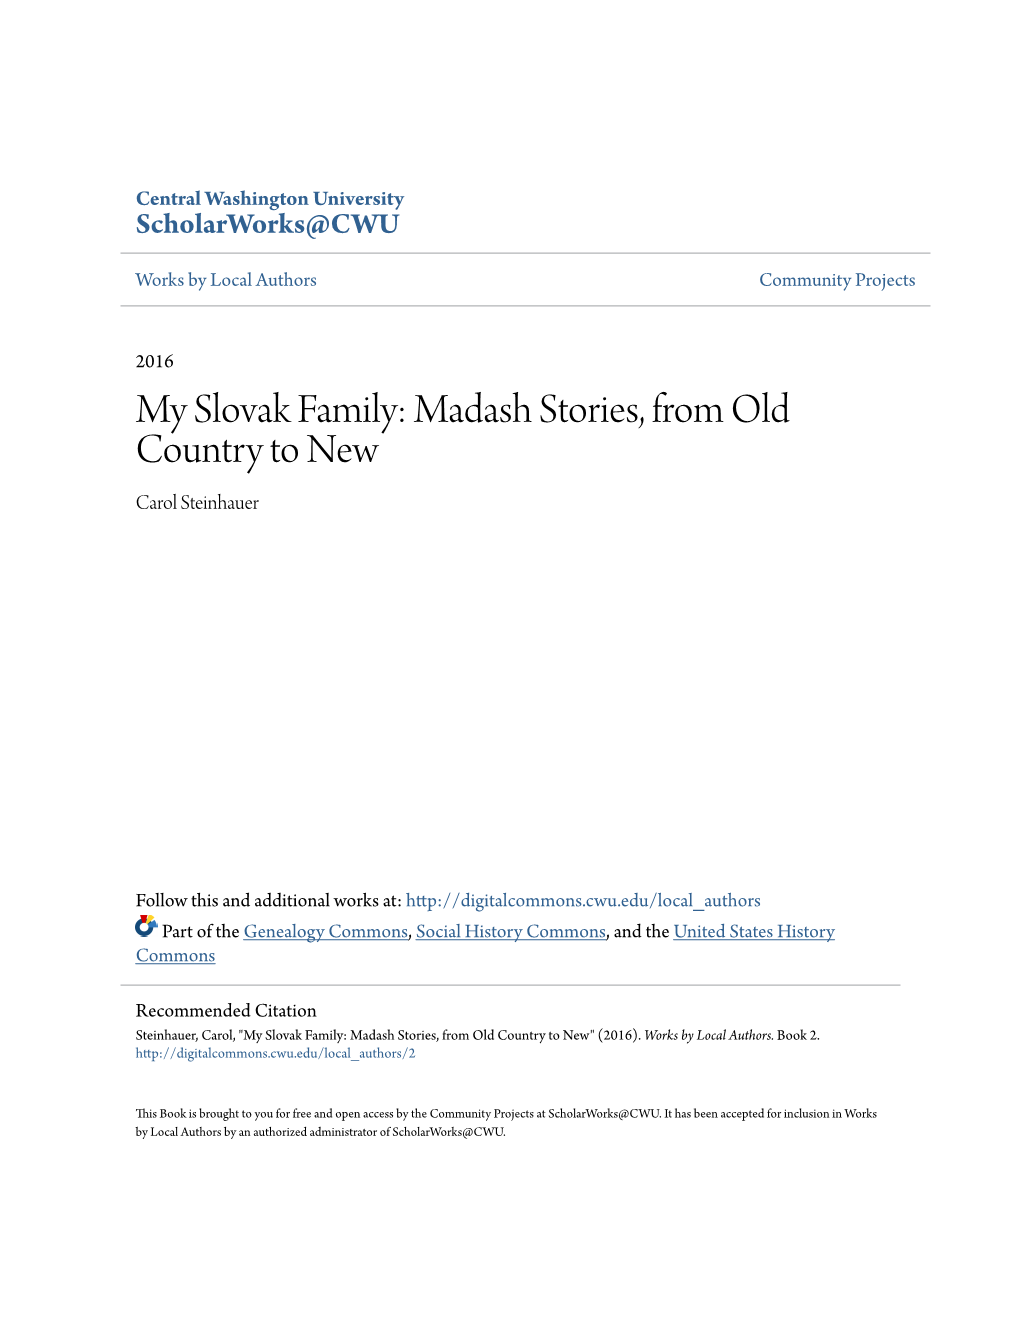 My Slovak Family: Madash Stories, from Old Country to New Carol Steinhauer